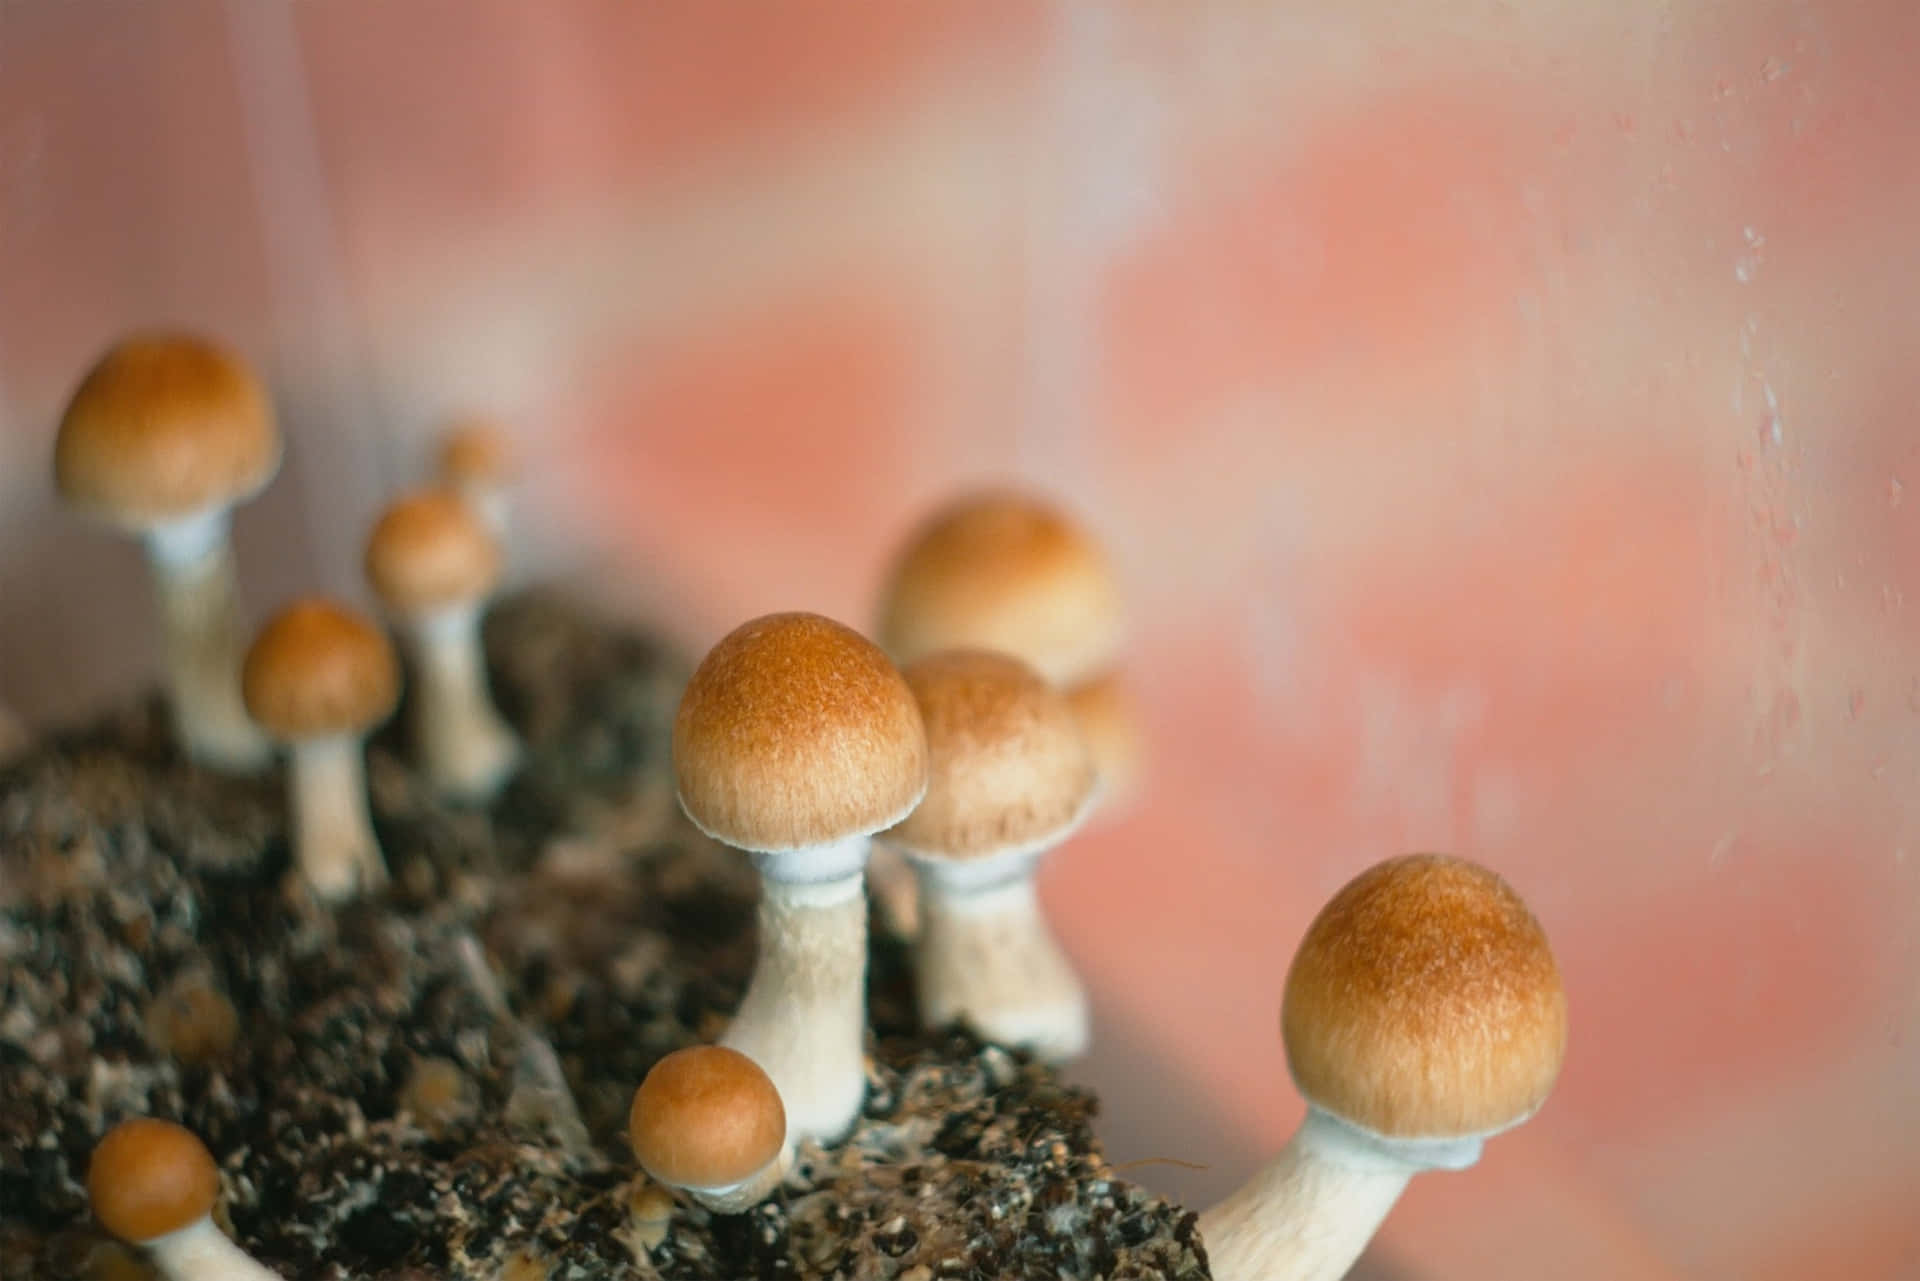 An enchanted forest of dreamy, vibrant magic mushrooms!